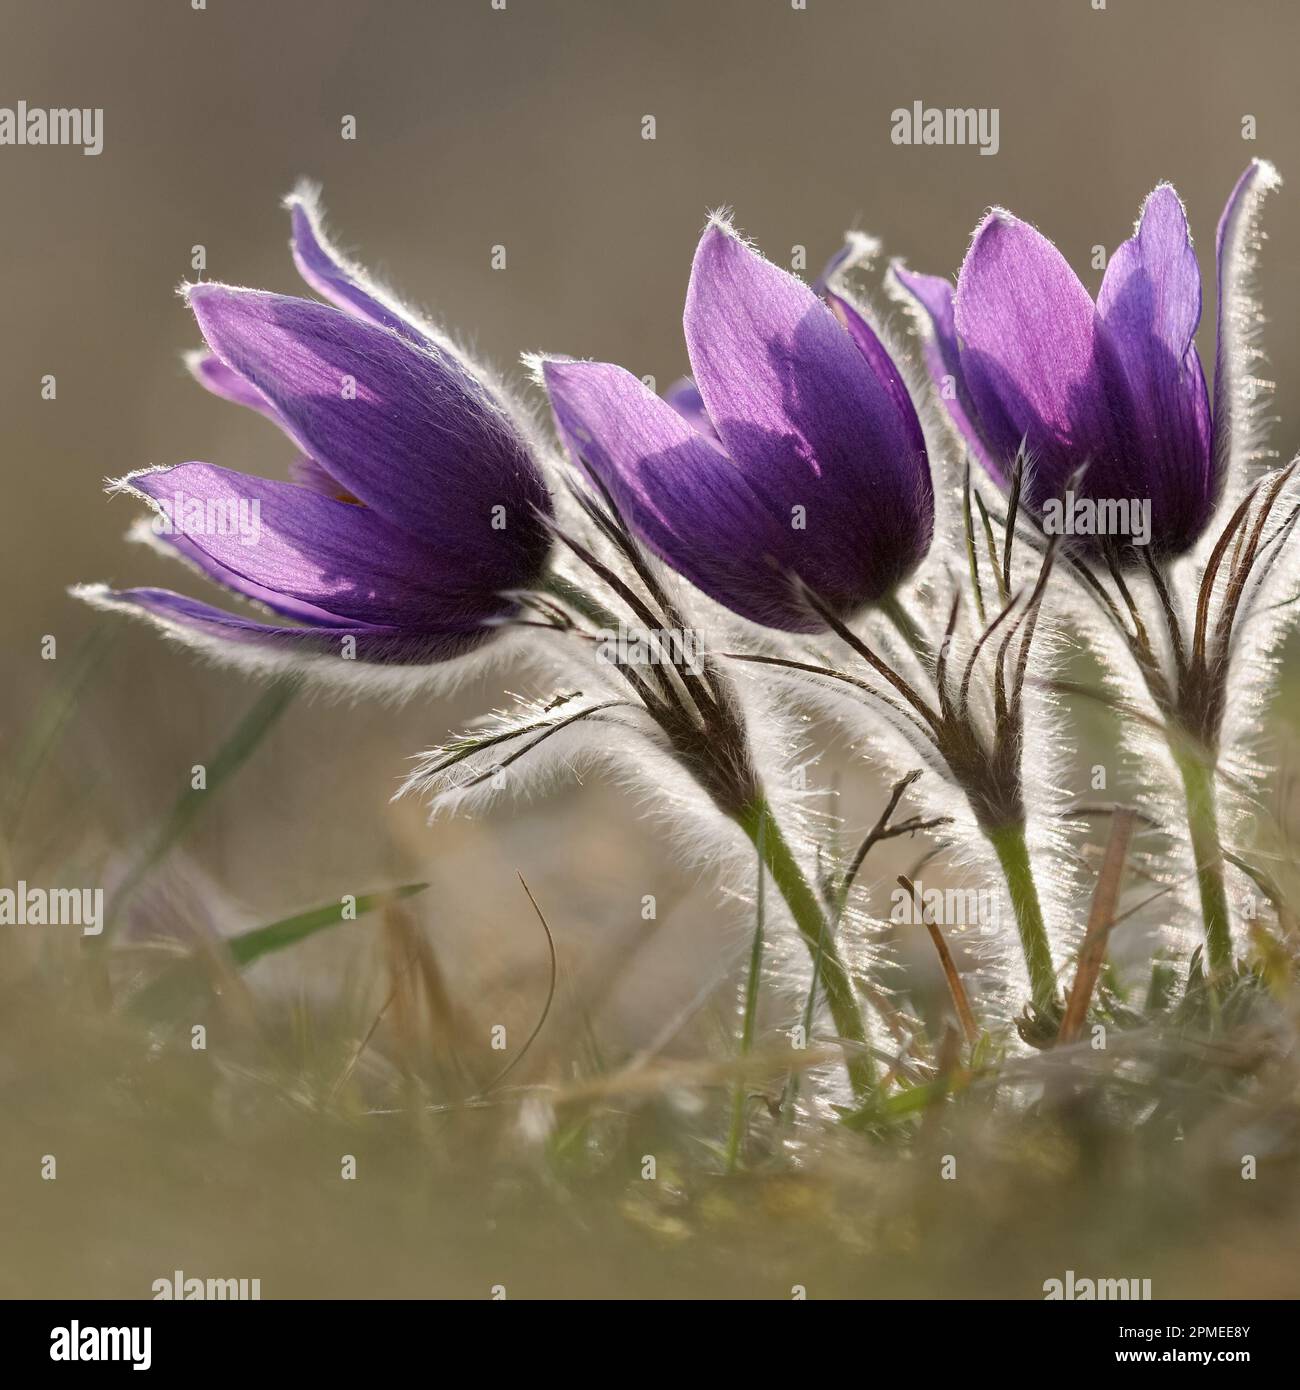 Common Pasque Flower ( Pulsatilla vulgaris ), flowering, blossoming spring ephemerals, growing on calcareous low-nutrient meadow, wild flower, Europe. Stock Photo